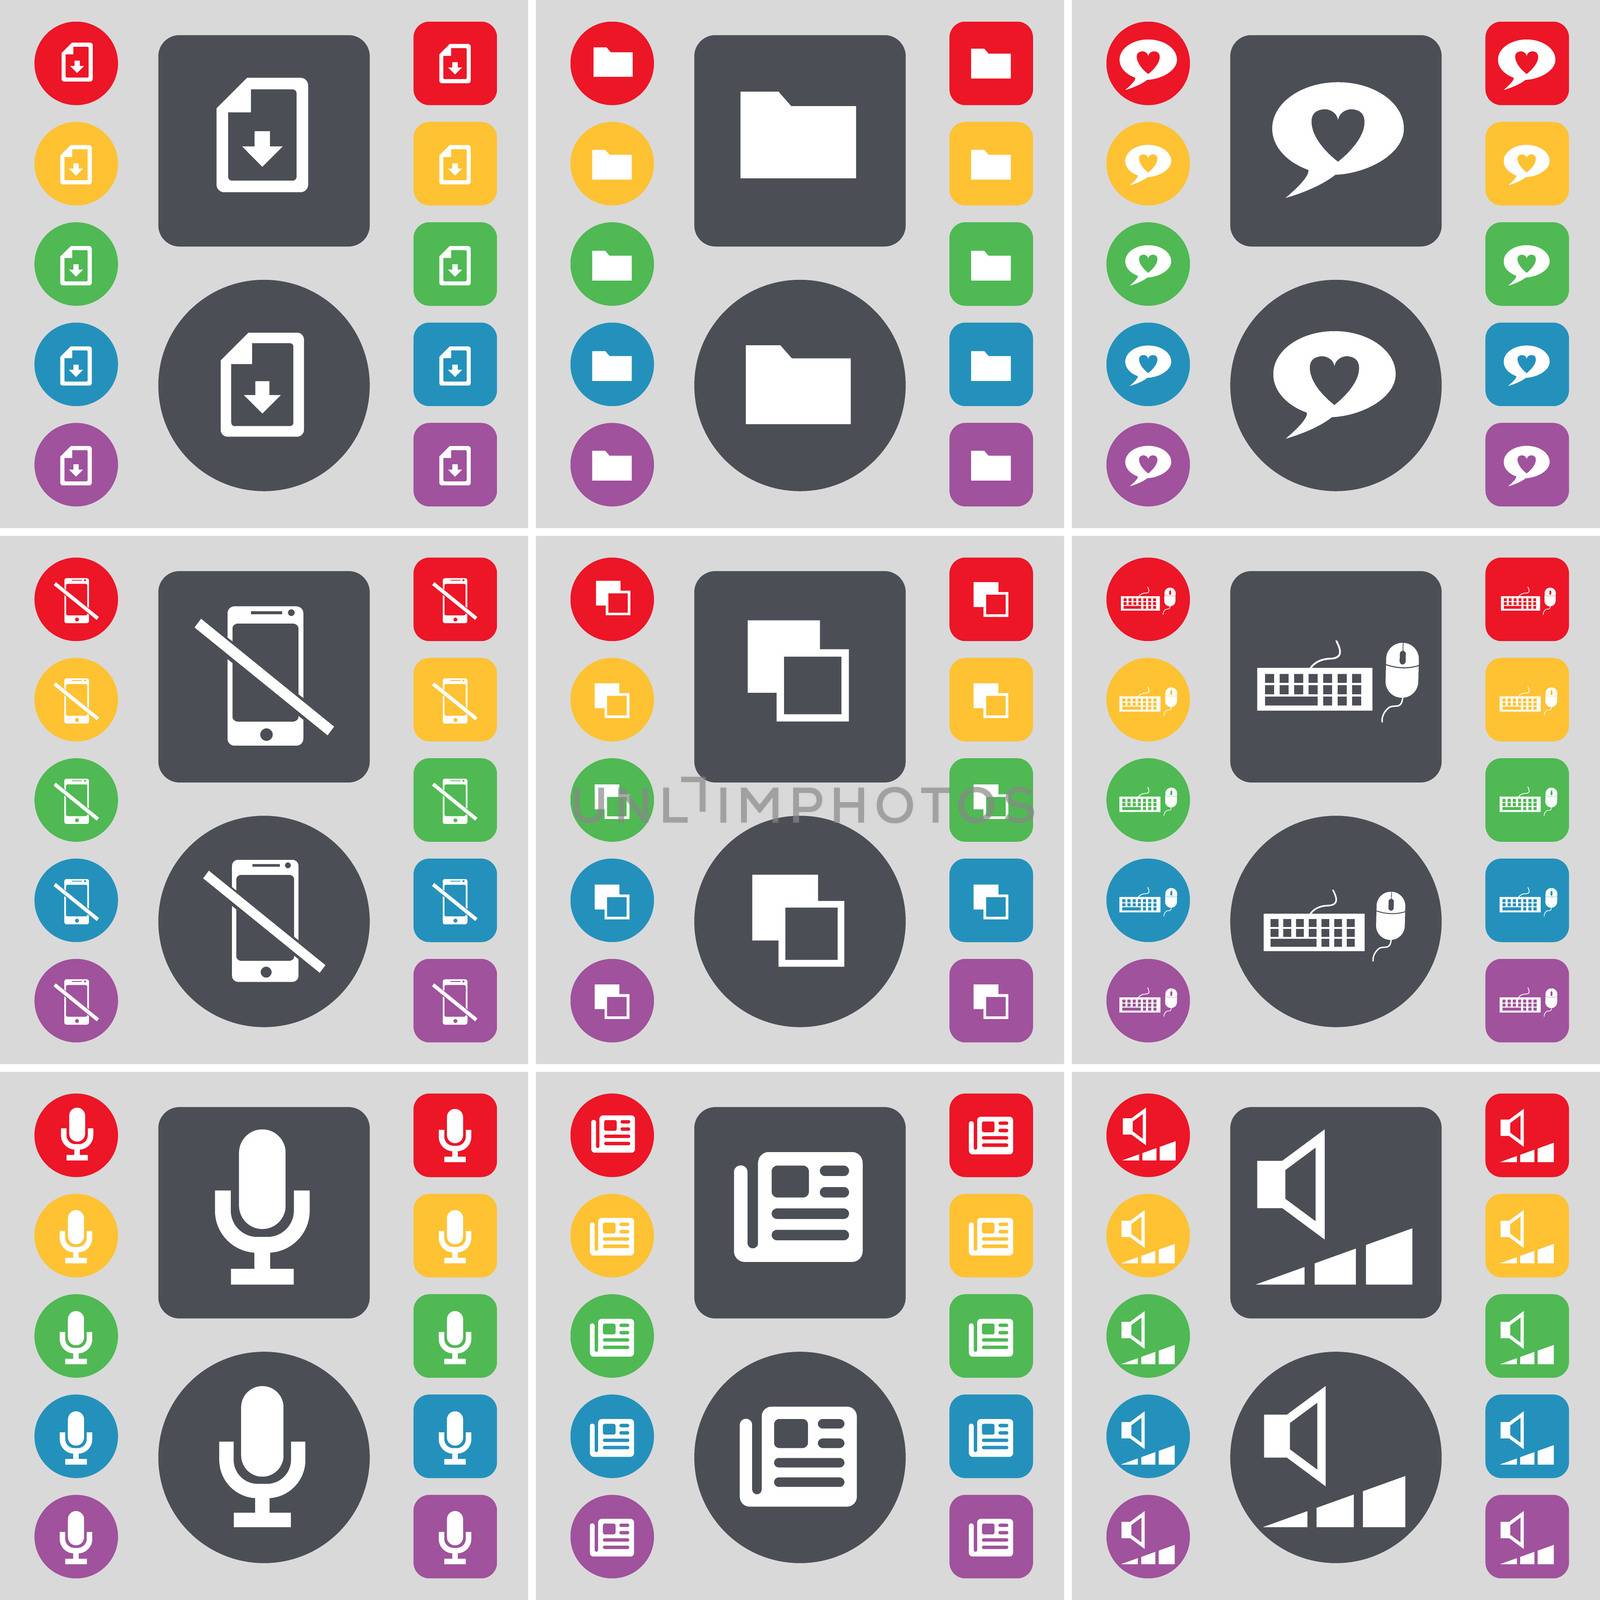 Download file, Folder, Chat bubble, Smartphone, Copy, Keyboard, Microphone, Newspaper, Volume icon symbol. A large set of flat, colored buttons for your design. illustration